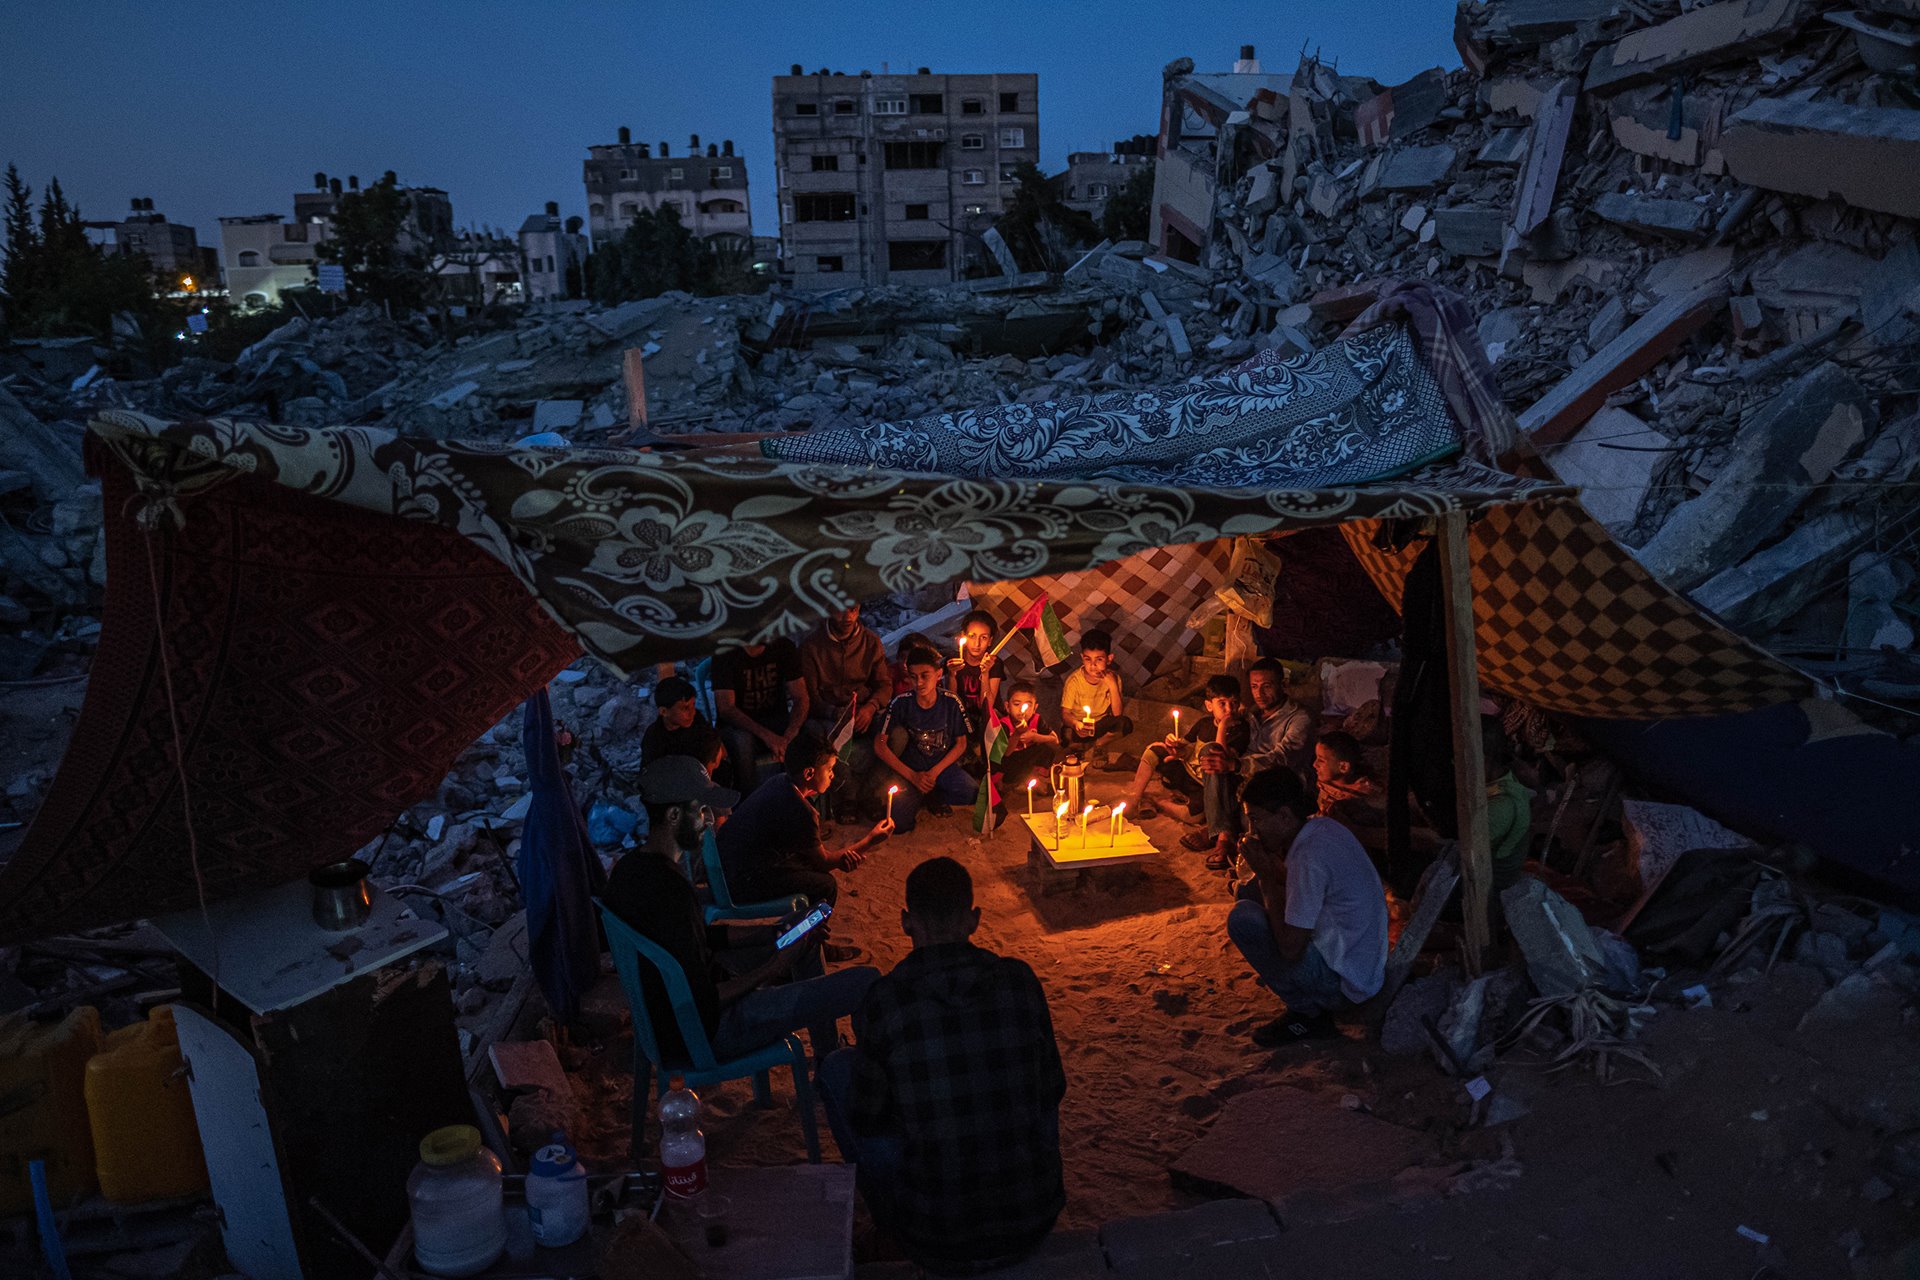 <p>Palestinian children gather with candles in Beit Lahia, Gaza, Palestine, after a protest by children in the neighborhood against attacks on Gaza, during a fragile ceasefire following an 11-day conflict between Hamas and Israel.</p>
